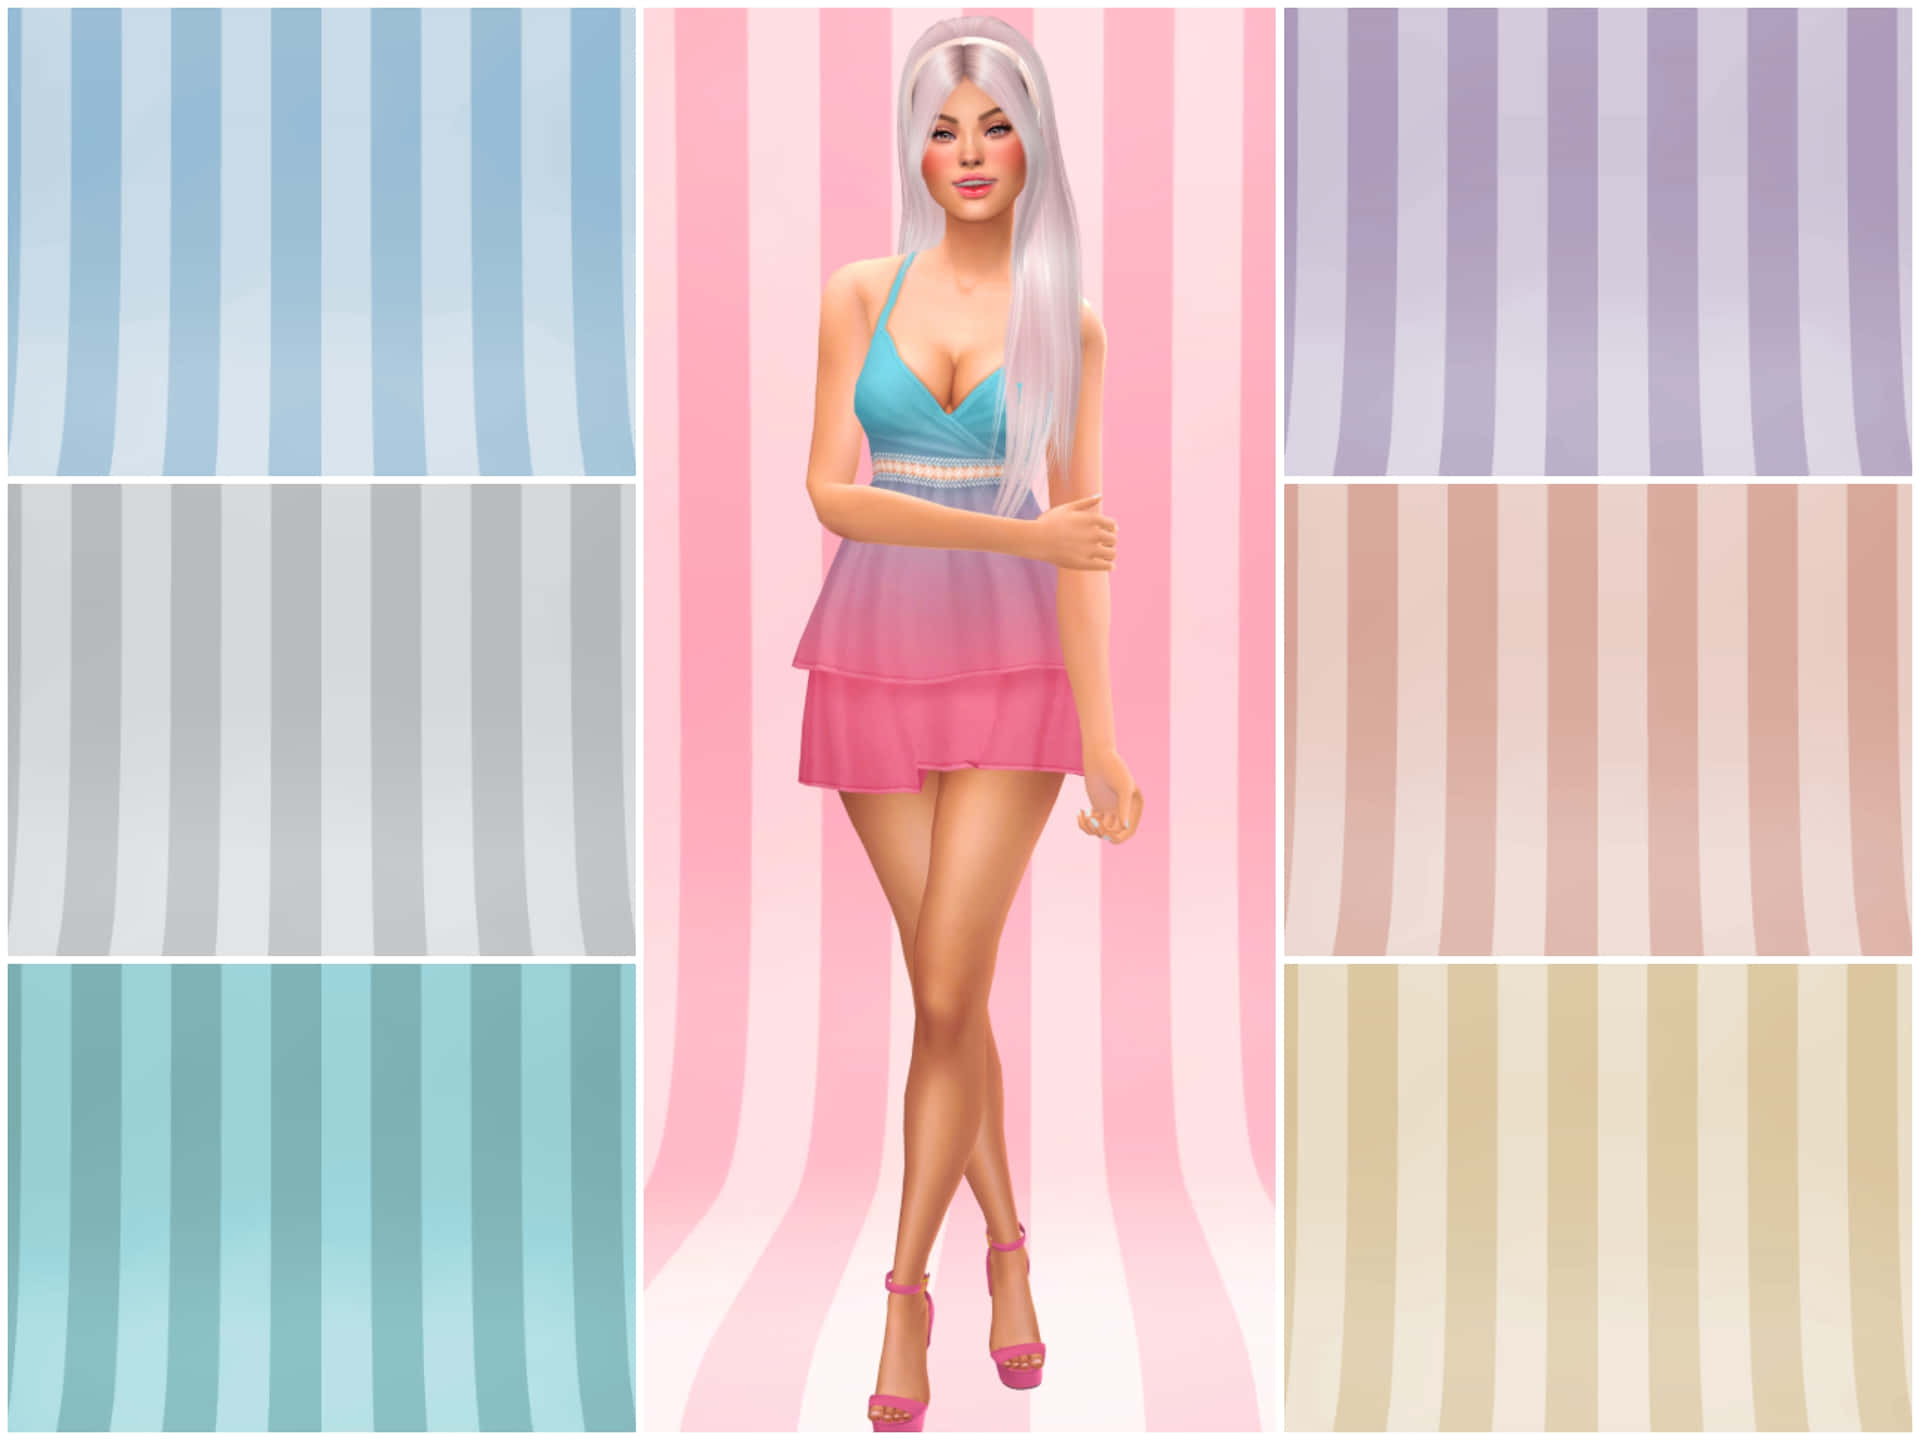 Striped Studio The Sims 4 Cas Background